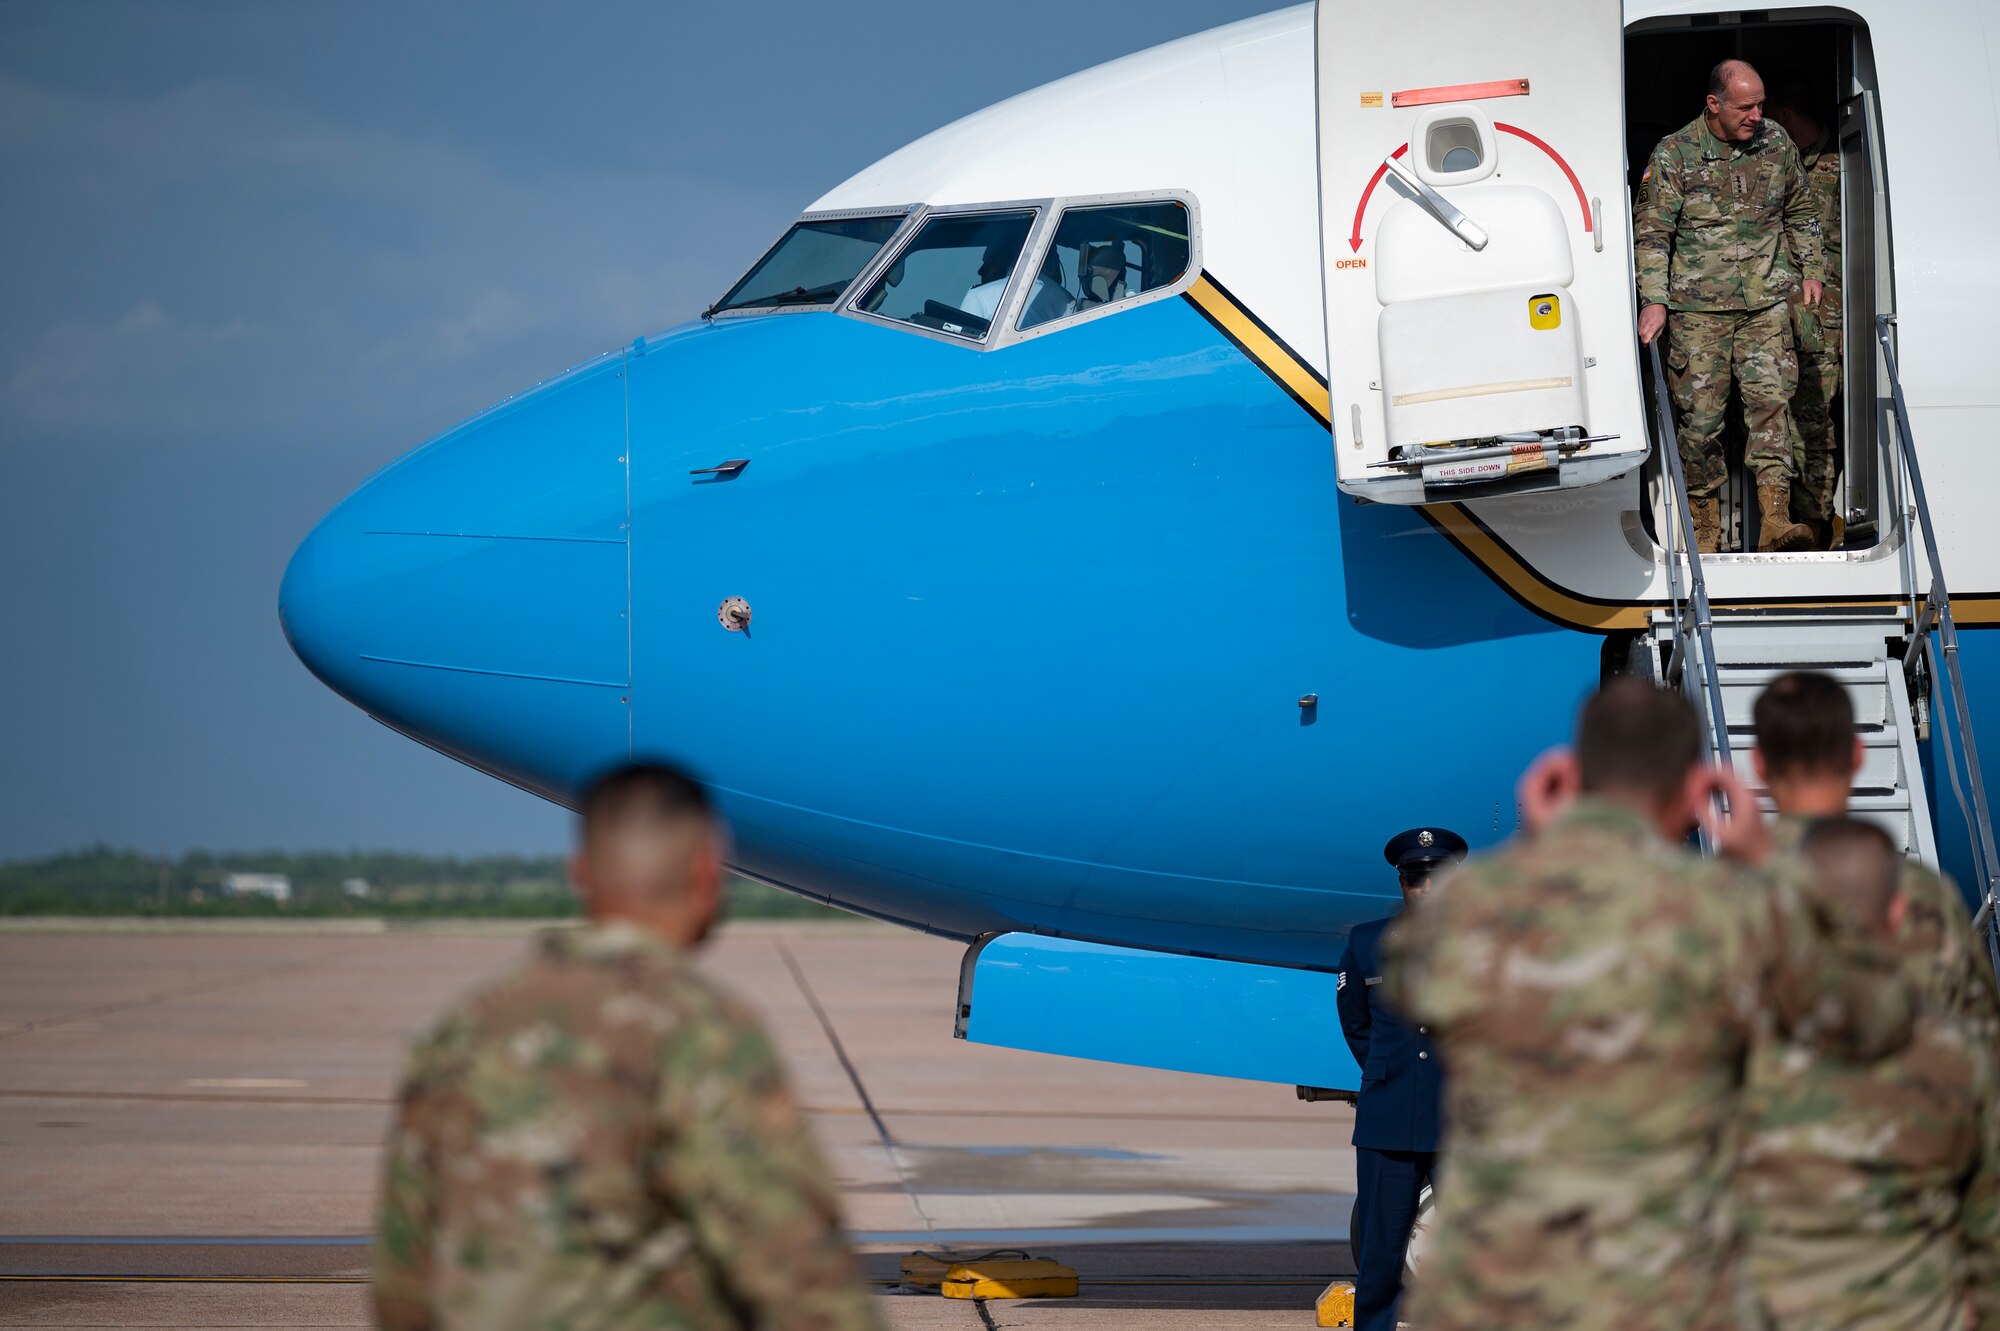 U.S. Army Gen. Stephen R. Lyons, U.S. Transportation Command commander, exits a Boeing C-40C at Dyess Air Force Base, Texas, July 28, 2021. Upon arrival, Lyons was greeted by the command teams of the 317th Airlift Wing and the 7th Bomb Wing before participating in a tour of the 39th Airlift Squadron. (U.S. Air Force photo by Senior Airman Colin Hollowell)